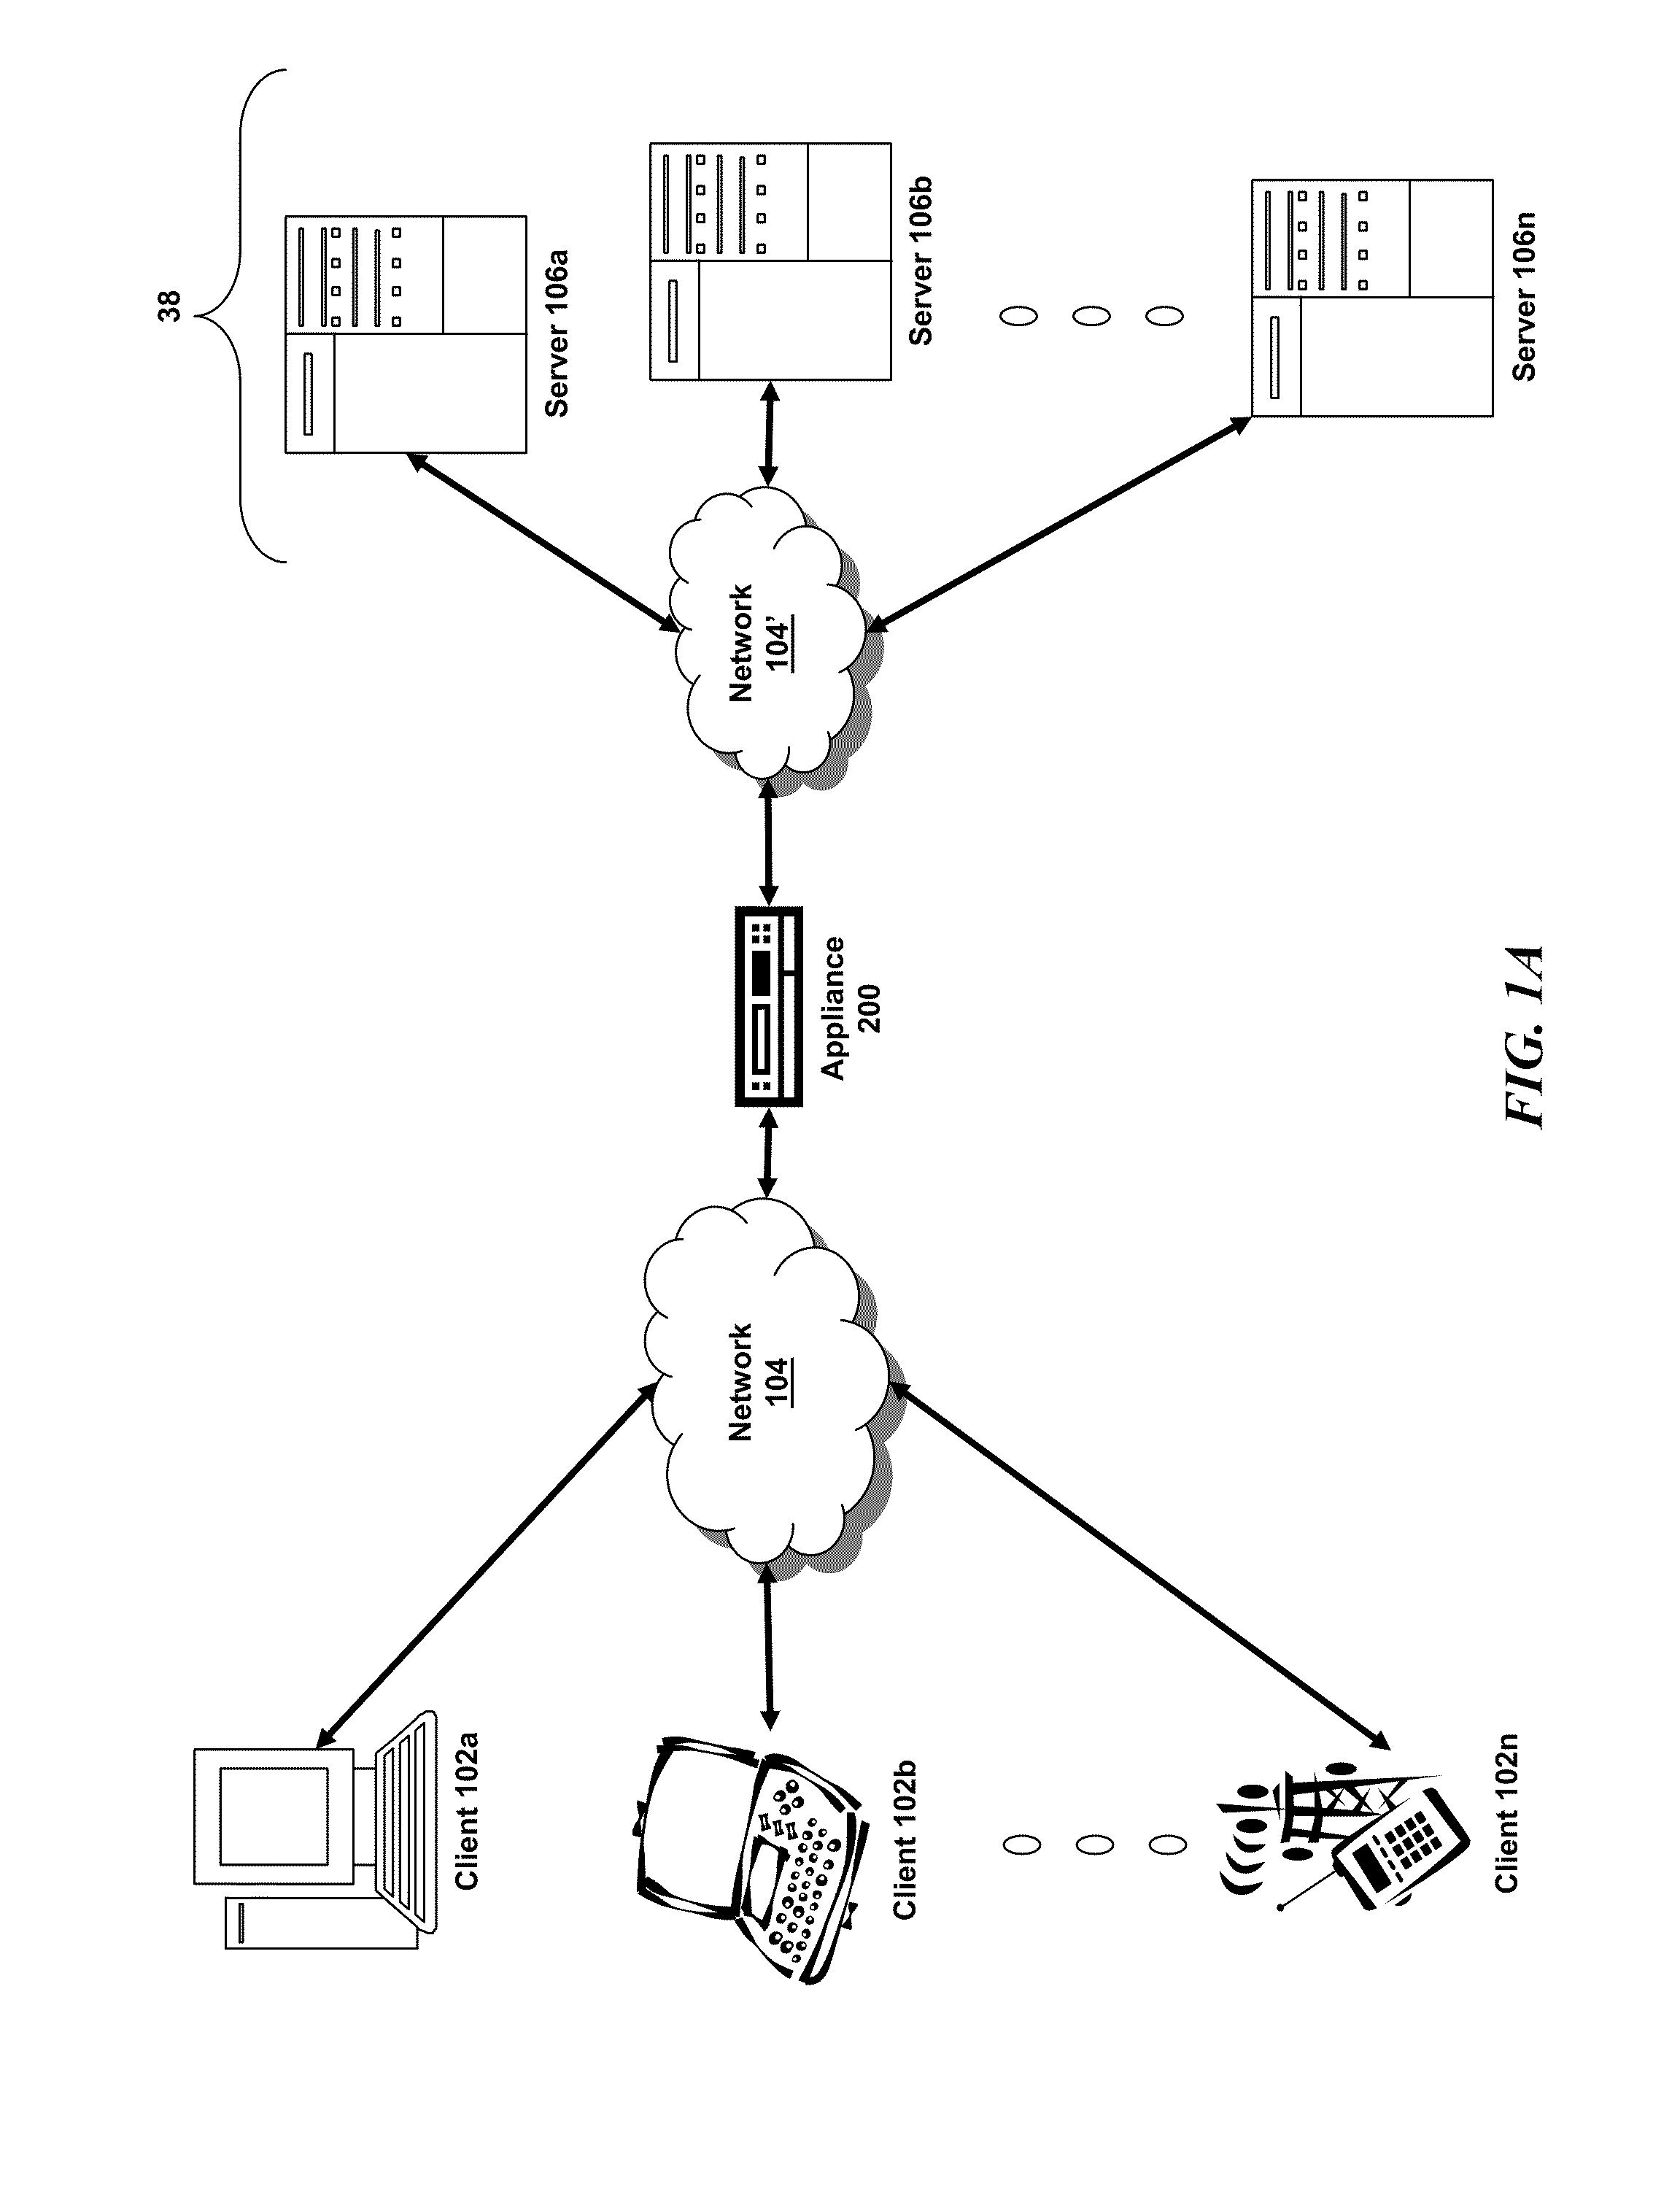 Systems and methods for handling a multi-connection protocol between a client and server traversing a multi-core system